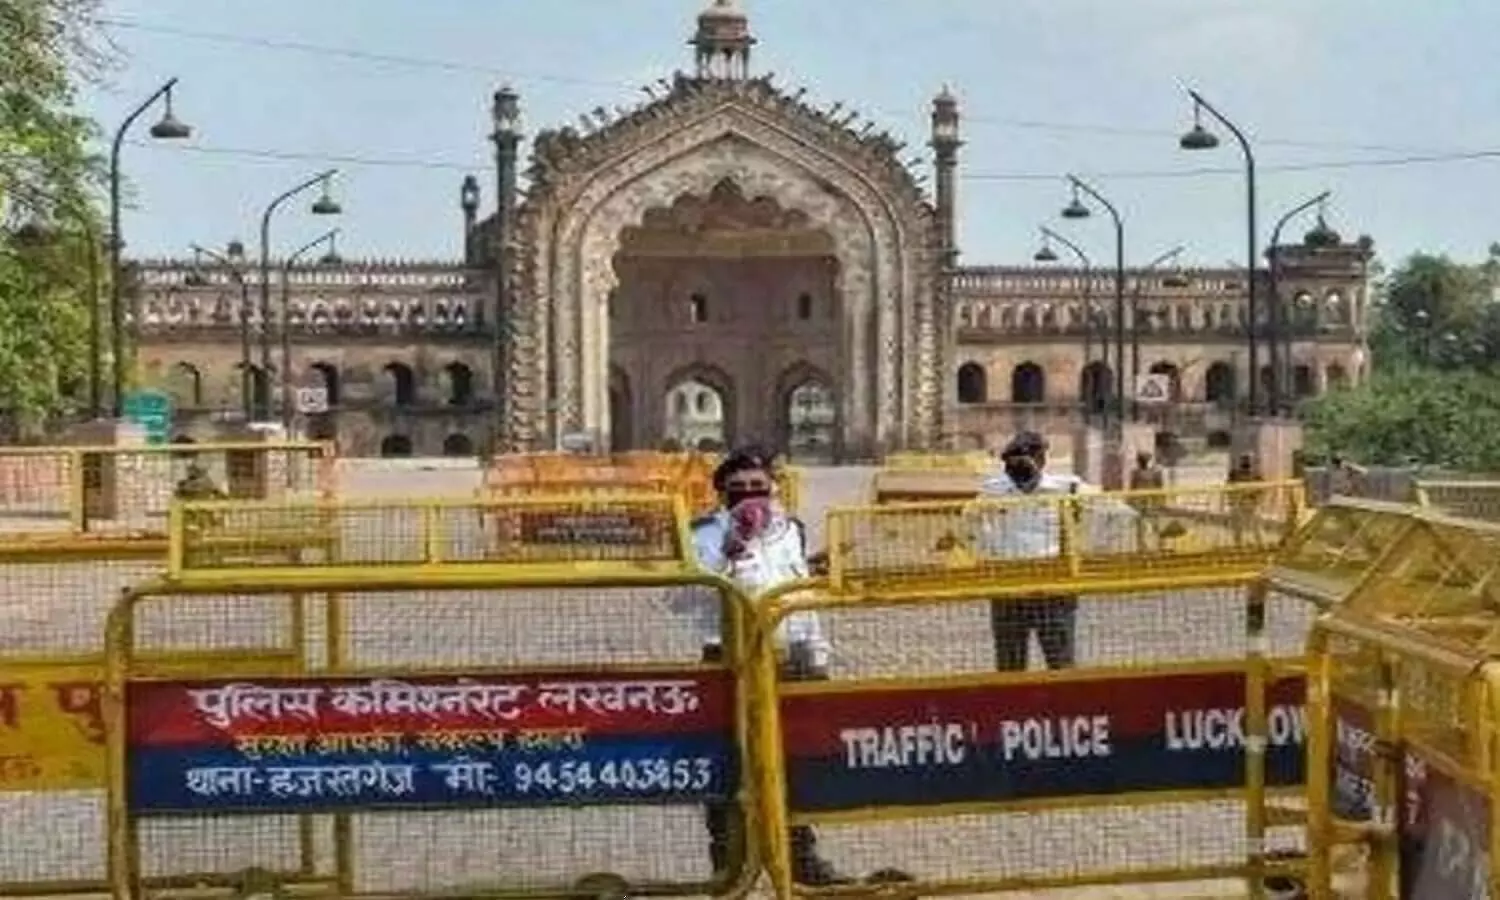 Section 144 imposed in lucknow